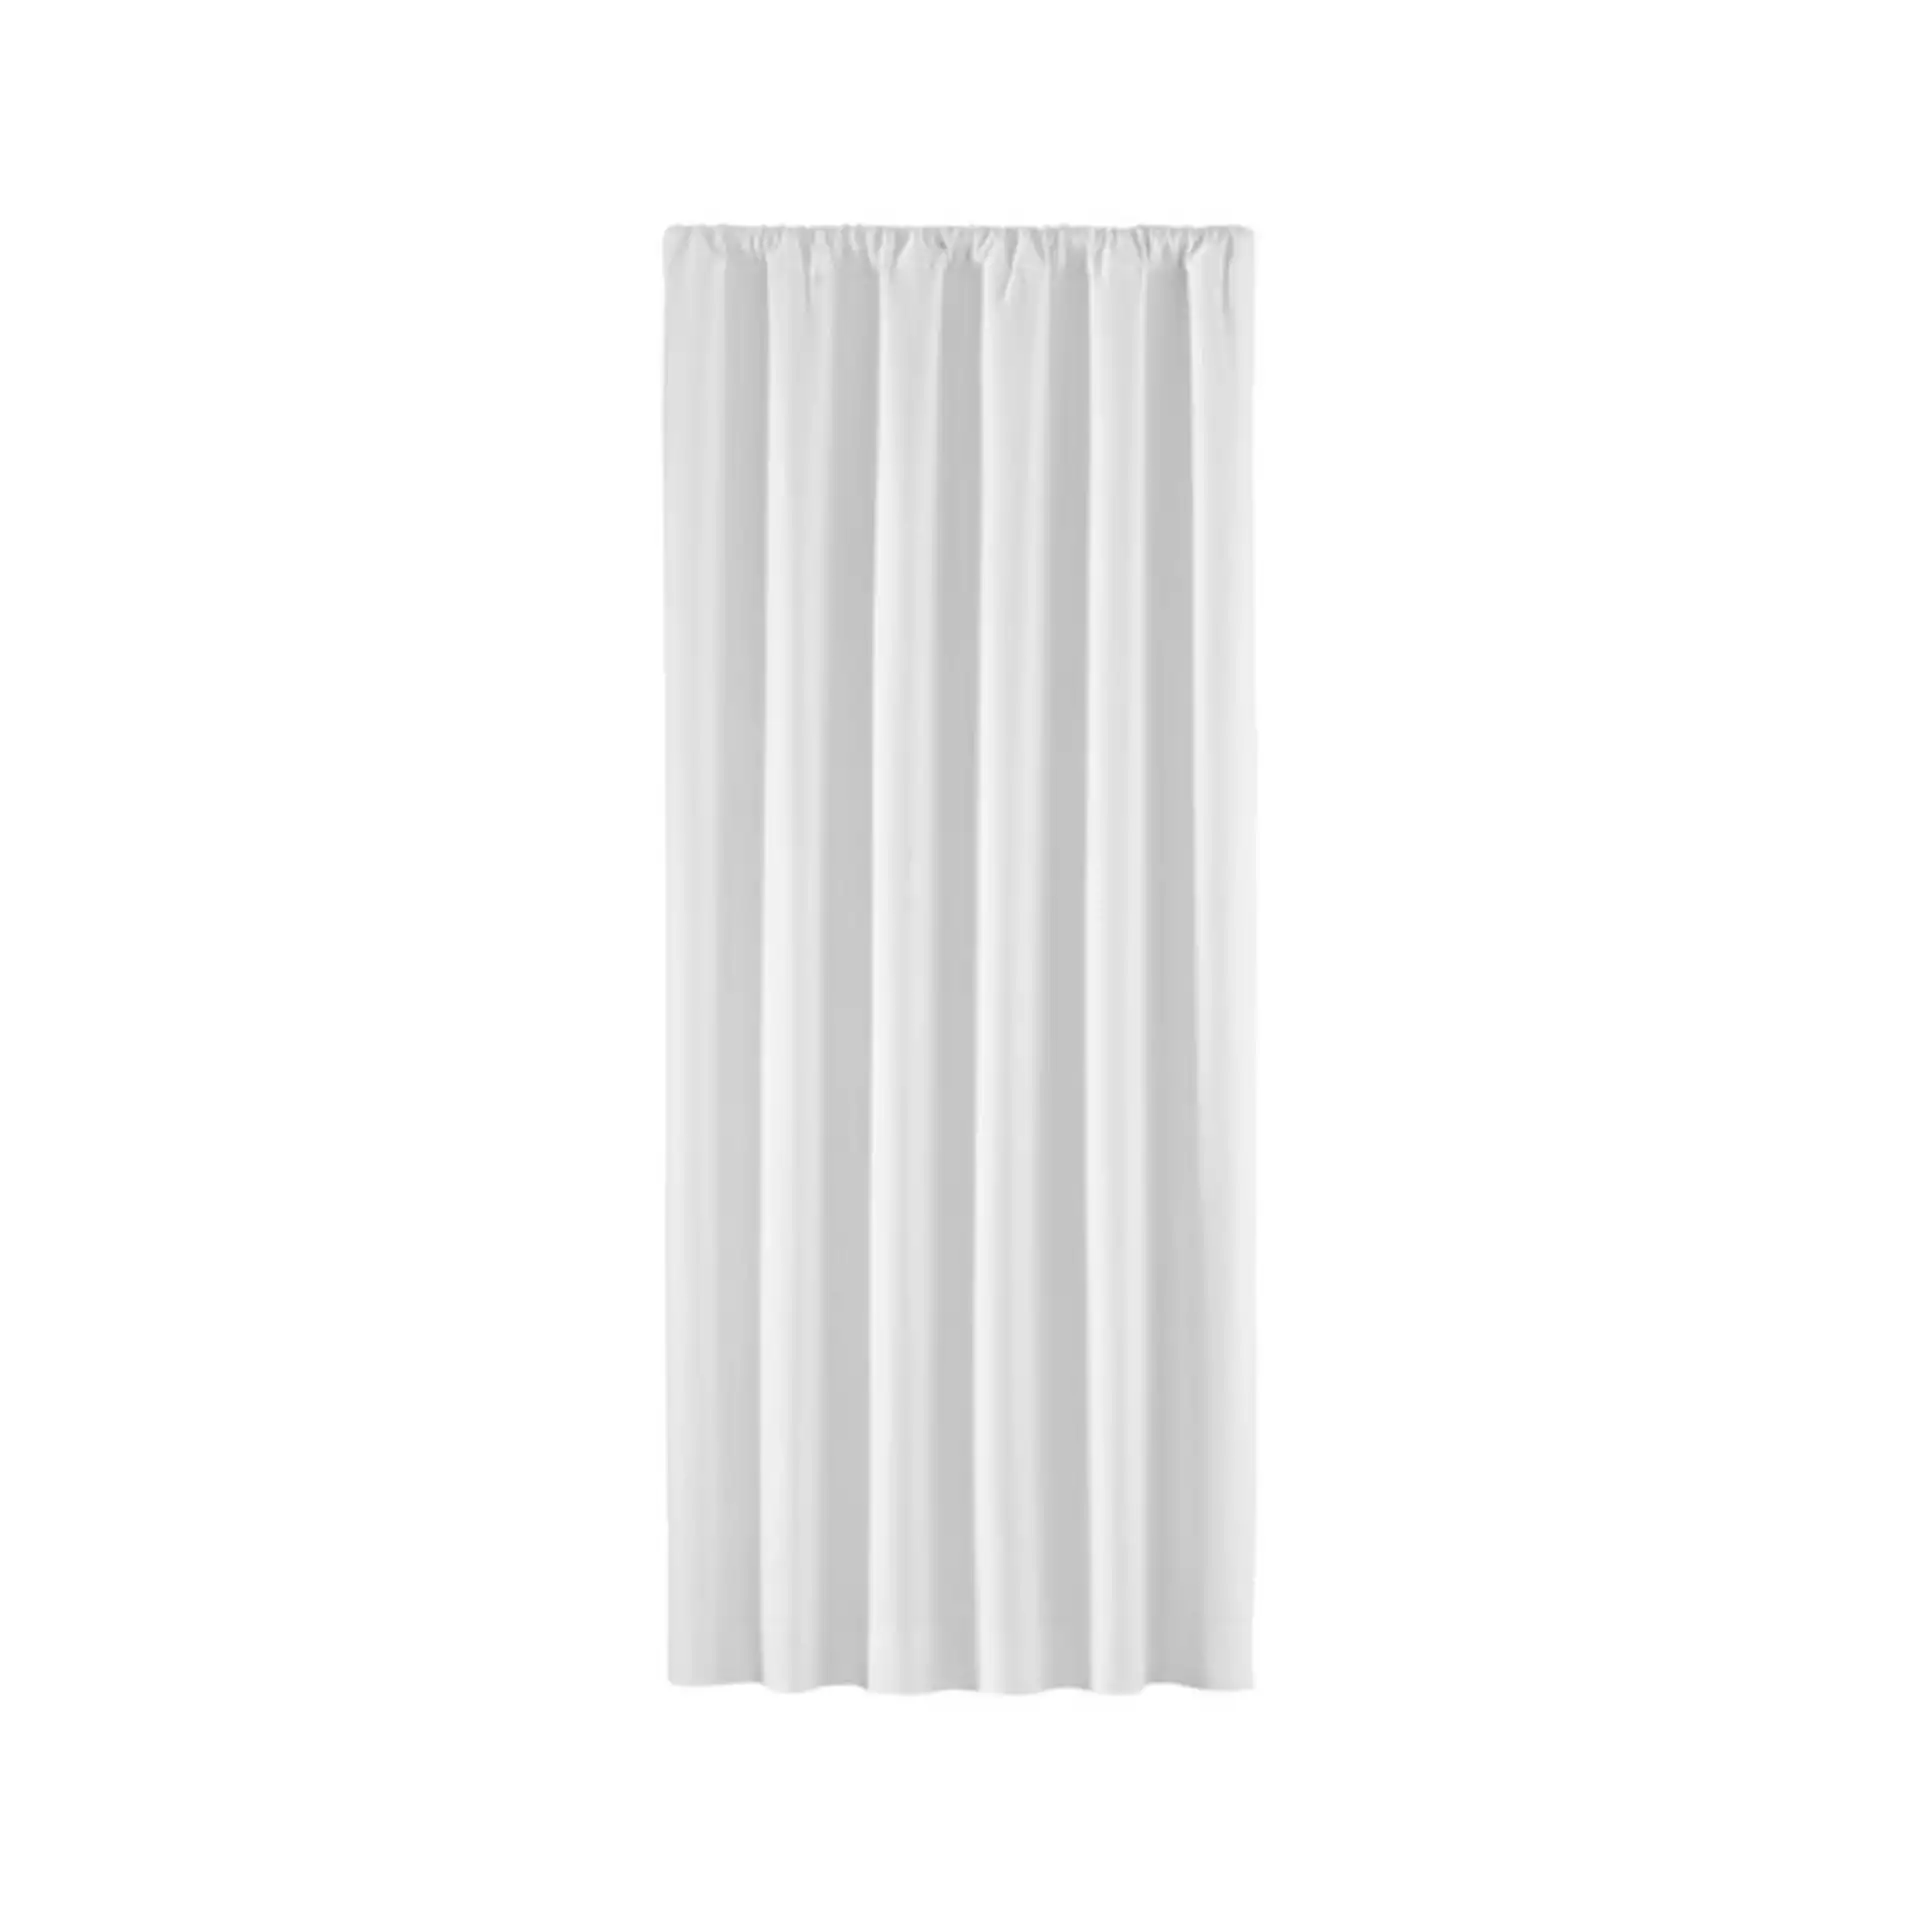 Wallace White Blackout Curtain Panel 52"x96"